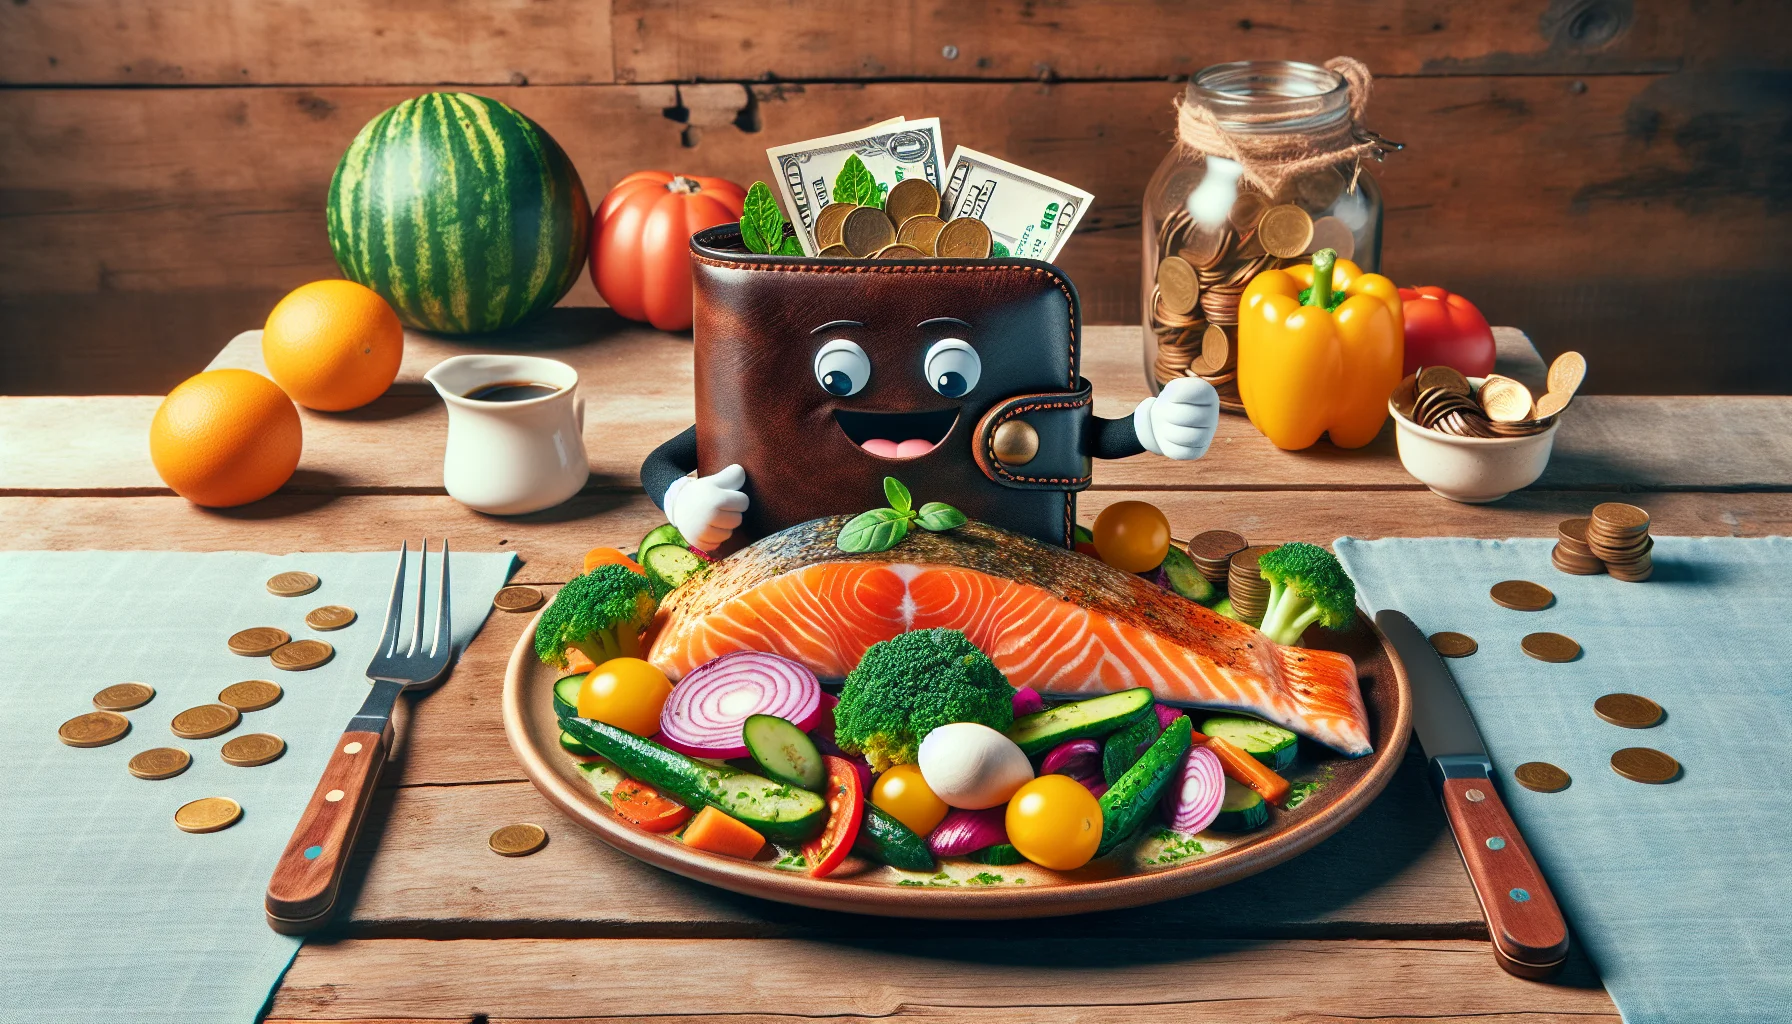 Envisage a humorous scenario promoting healthy eating on a budget. In the center, focus on a wild-caught salmon dish, deliciously prepared, with a myriad of colorful vegetables around it on a rustic wooden table. To add a touch of humor, include an animated wallet sitting beside the plate, displaying a big smile on its face, while it cheerfully counts a pile of coins. Use warm, inviting colors to suggest affordability and highlight the richness of the meal.